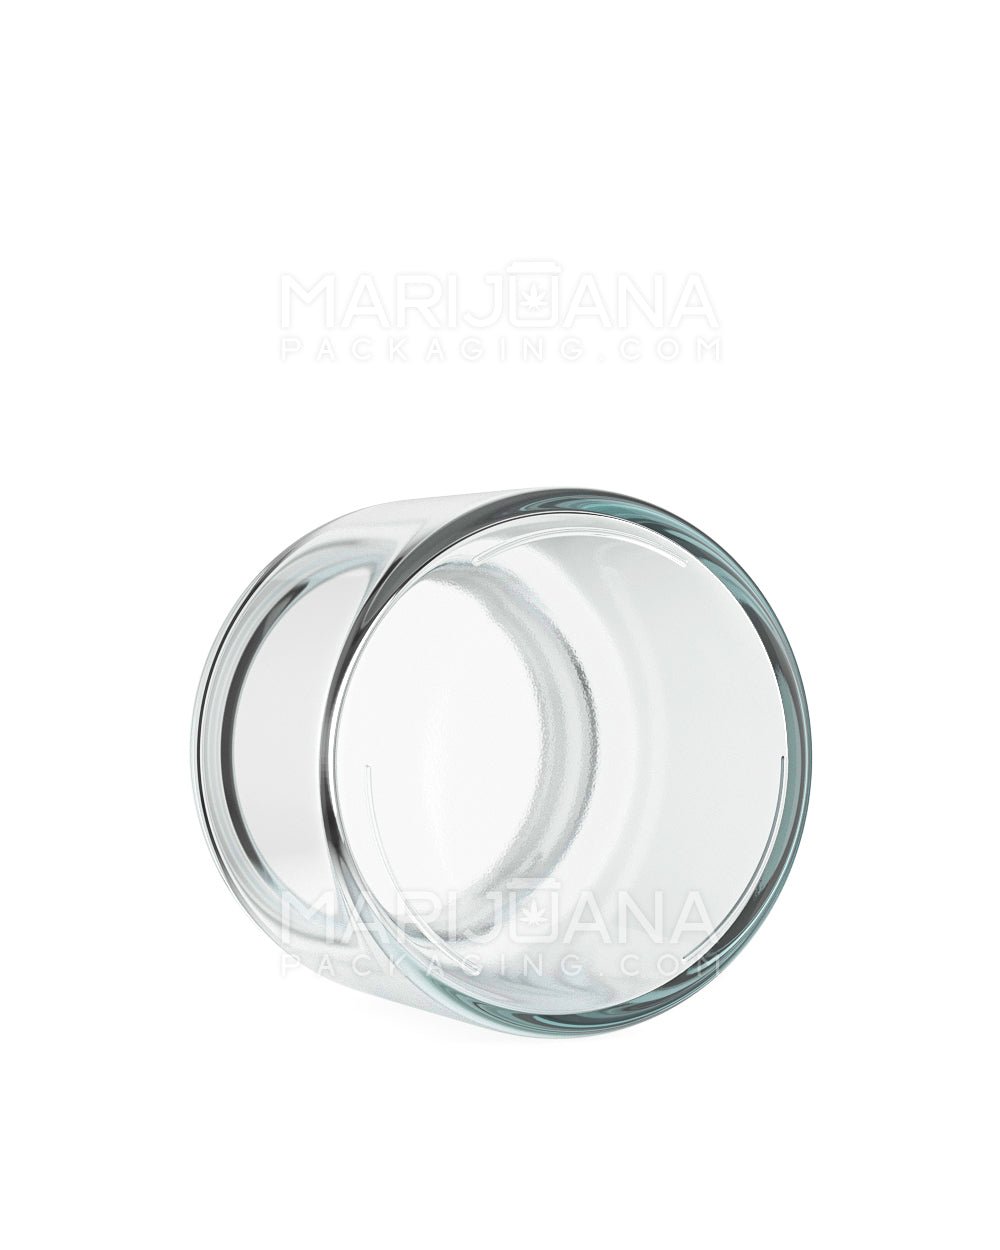 Straight Sided Clear Glass Jars | 53mm - 3oz - 32 Count - 5